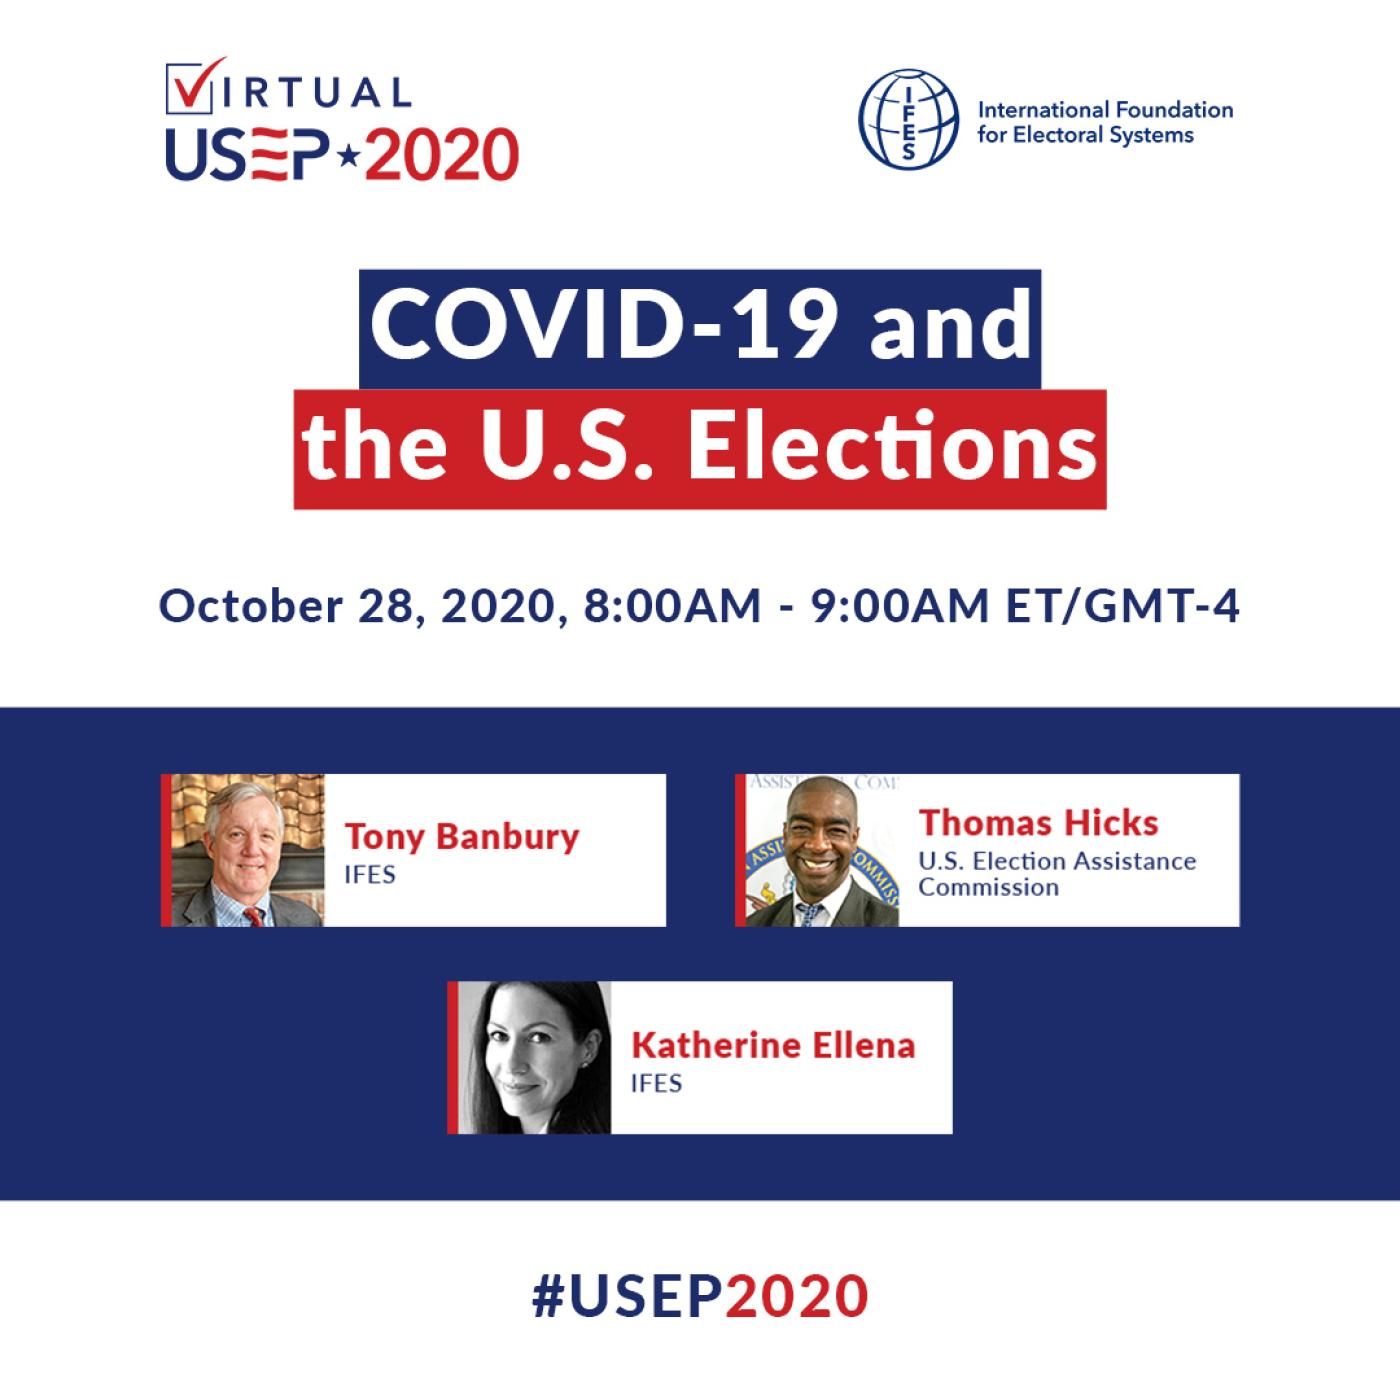 COVID-19 and the U.S. Elections